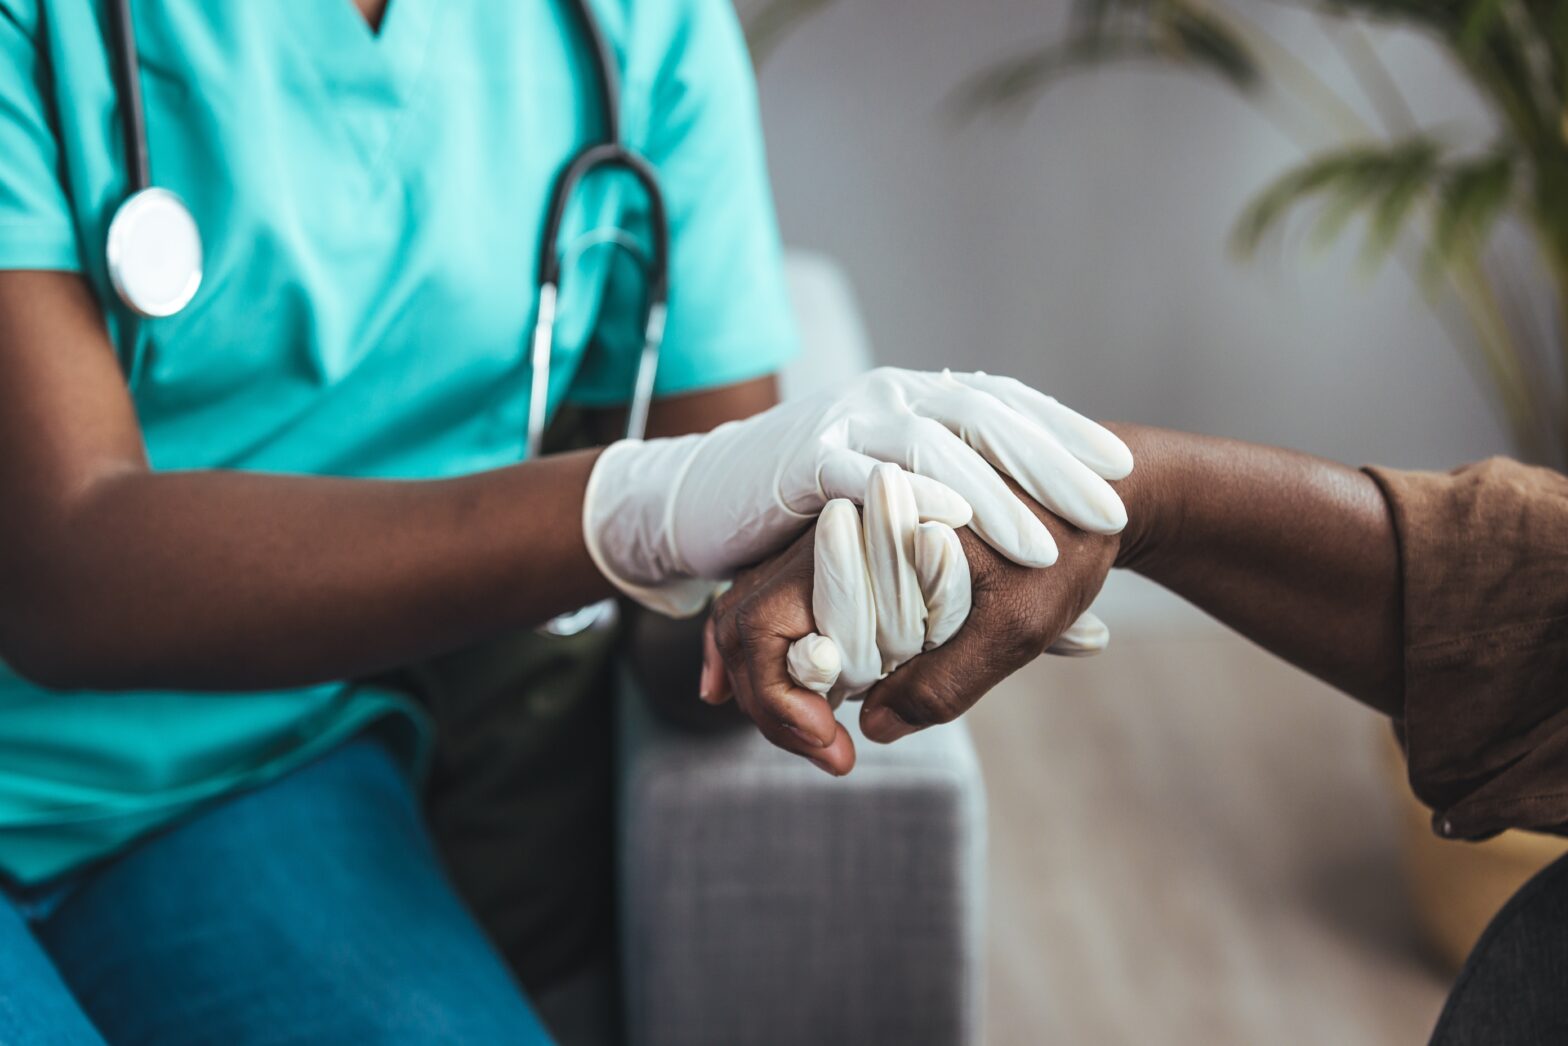 Shot of a hand being held by other hands beloning to a medical professional